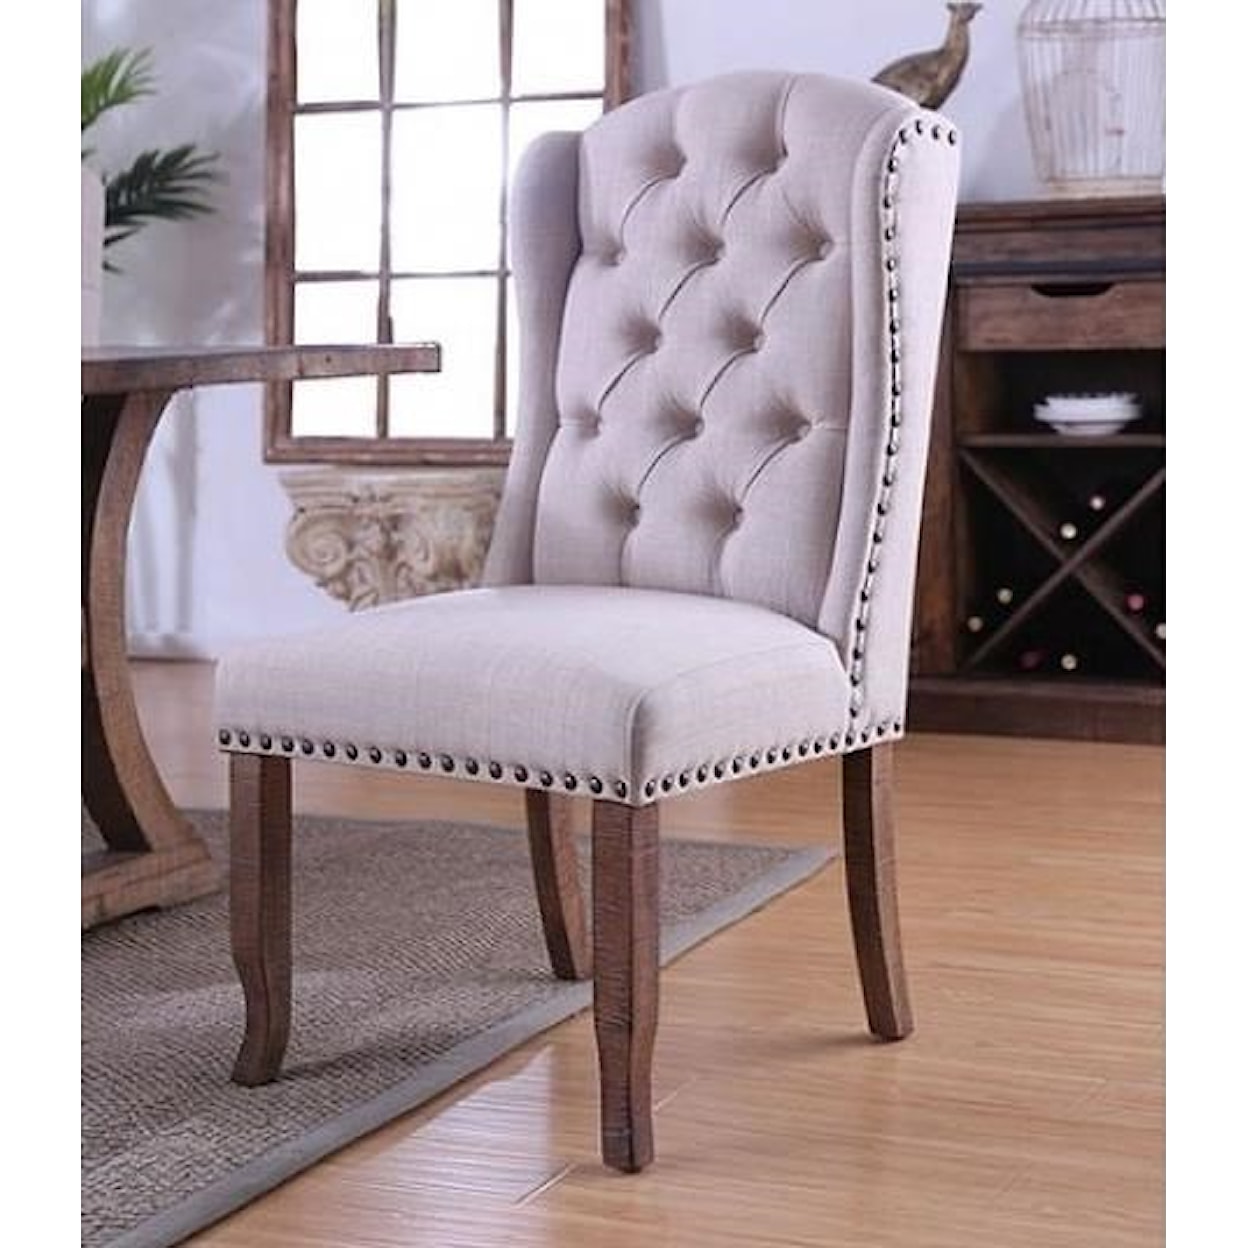 FUSA Gianna Wingback Chair, 2 Pack